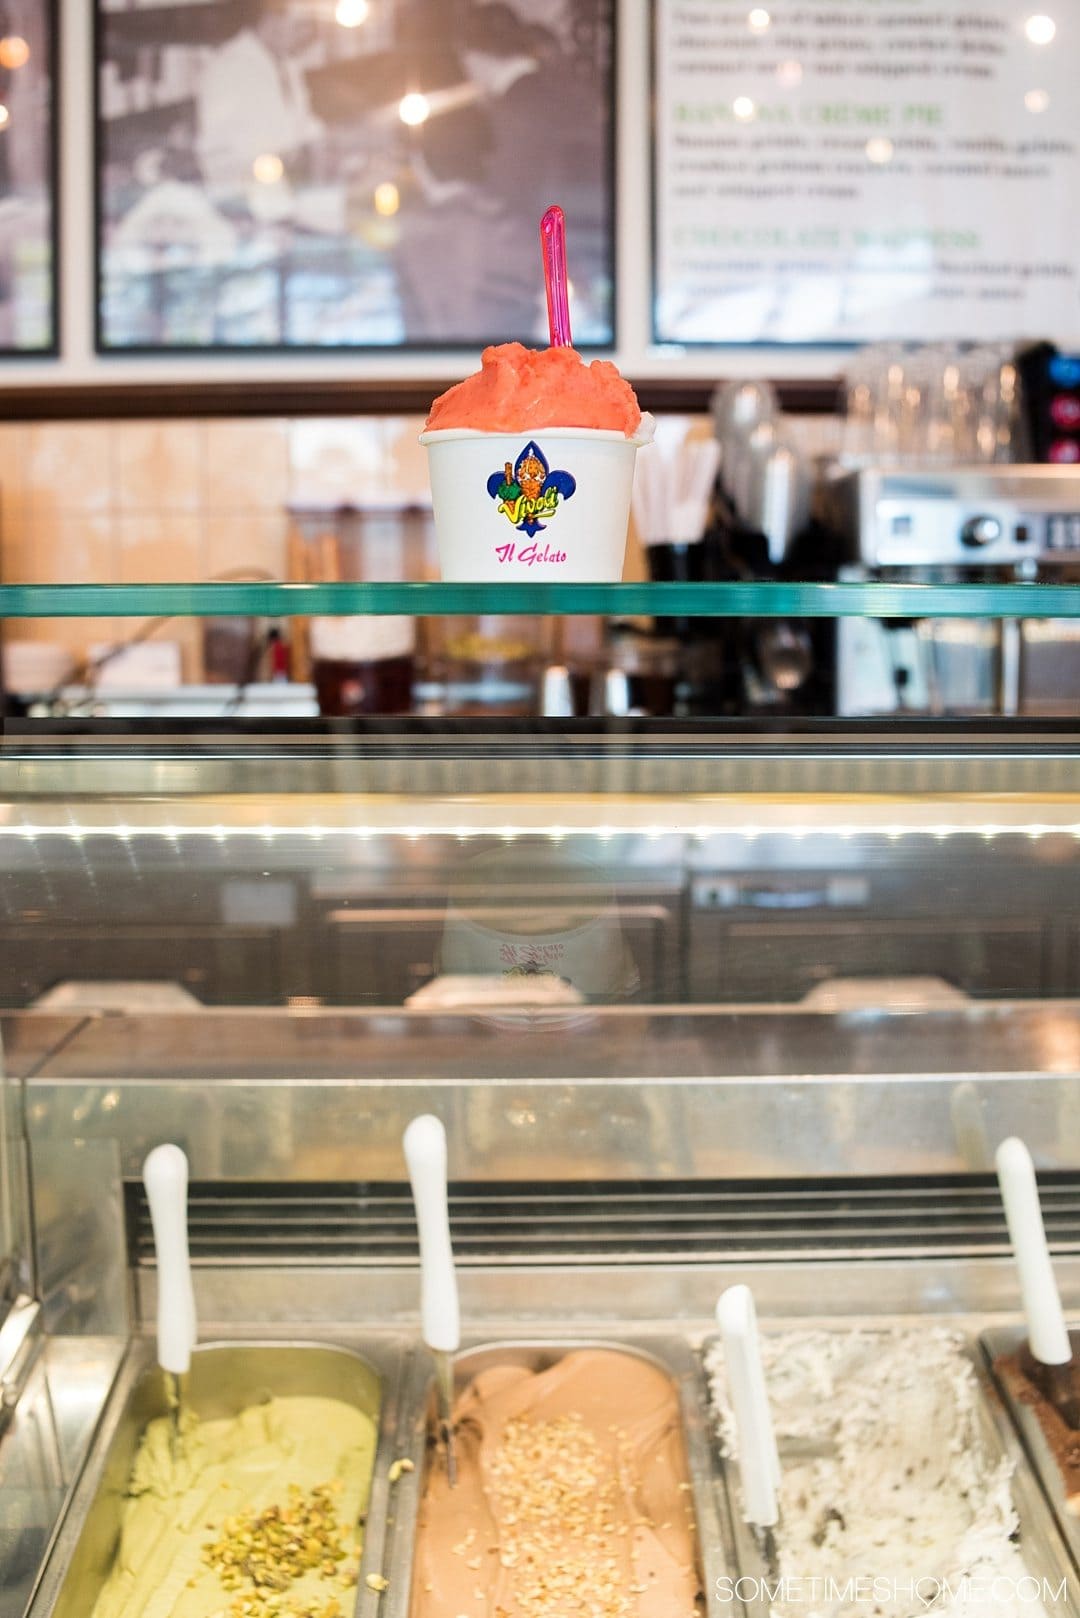 Sorbet at a Gelato shop at Disney Springs on top of the counter.